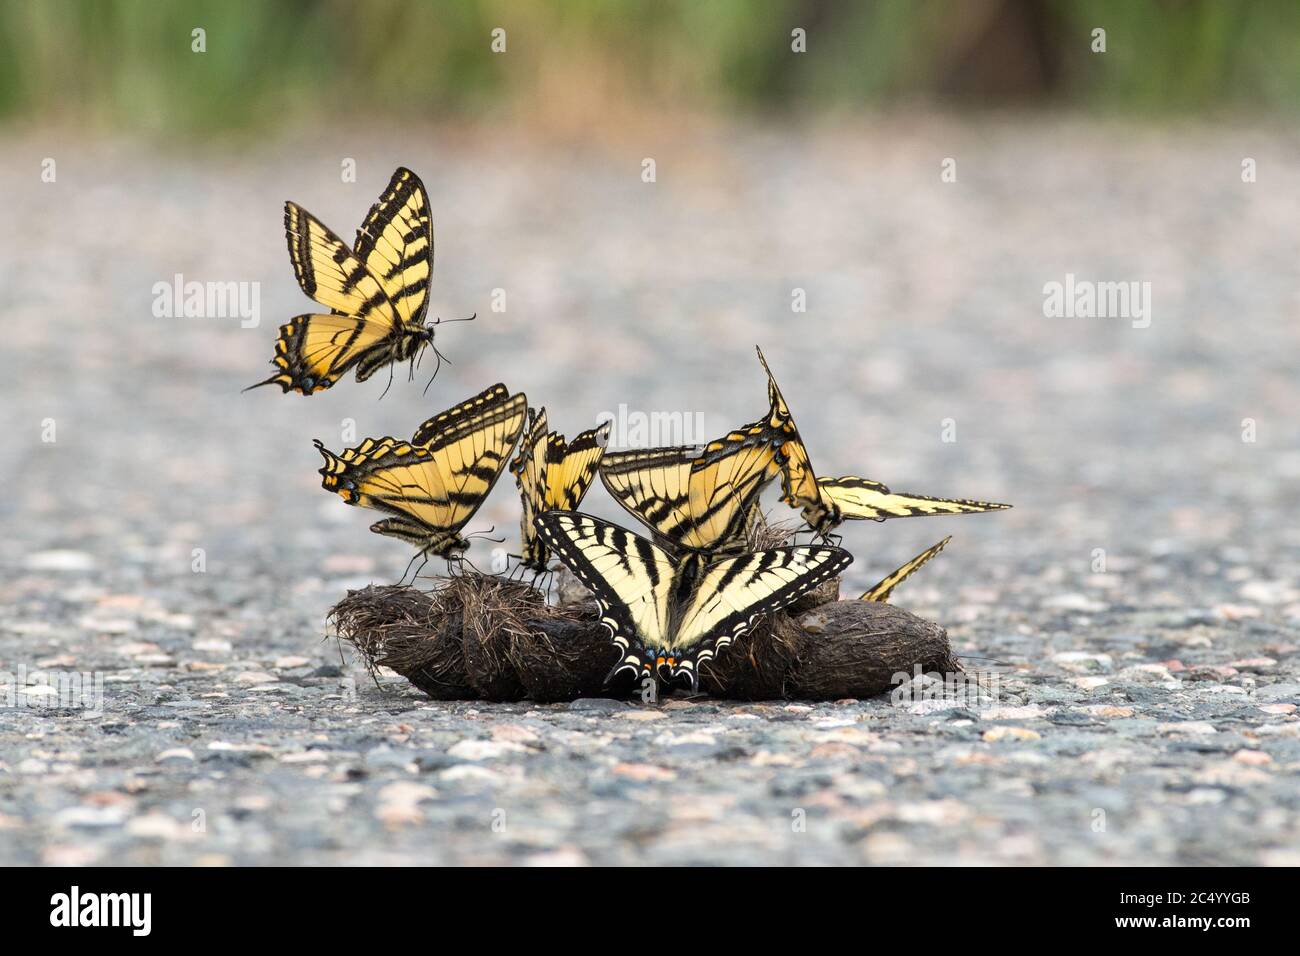 Several Canada tiger swallowtail butterflies (Papilio canadensis) getting nutrients and moisture from grey wolf (Canis lupus) feces. Stock Photo